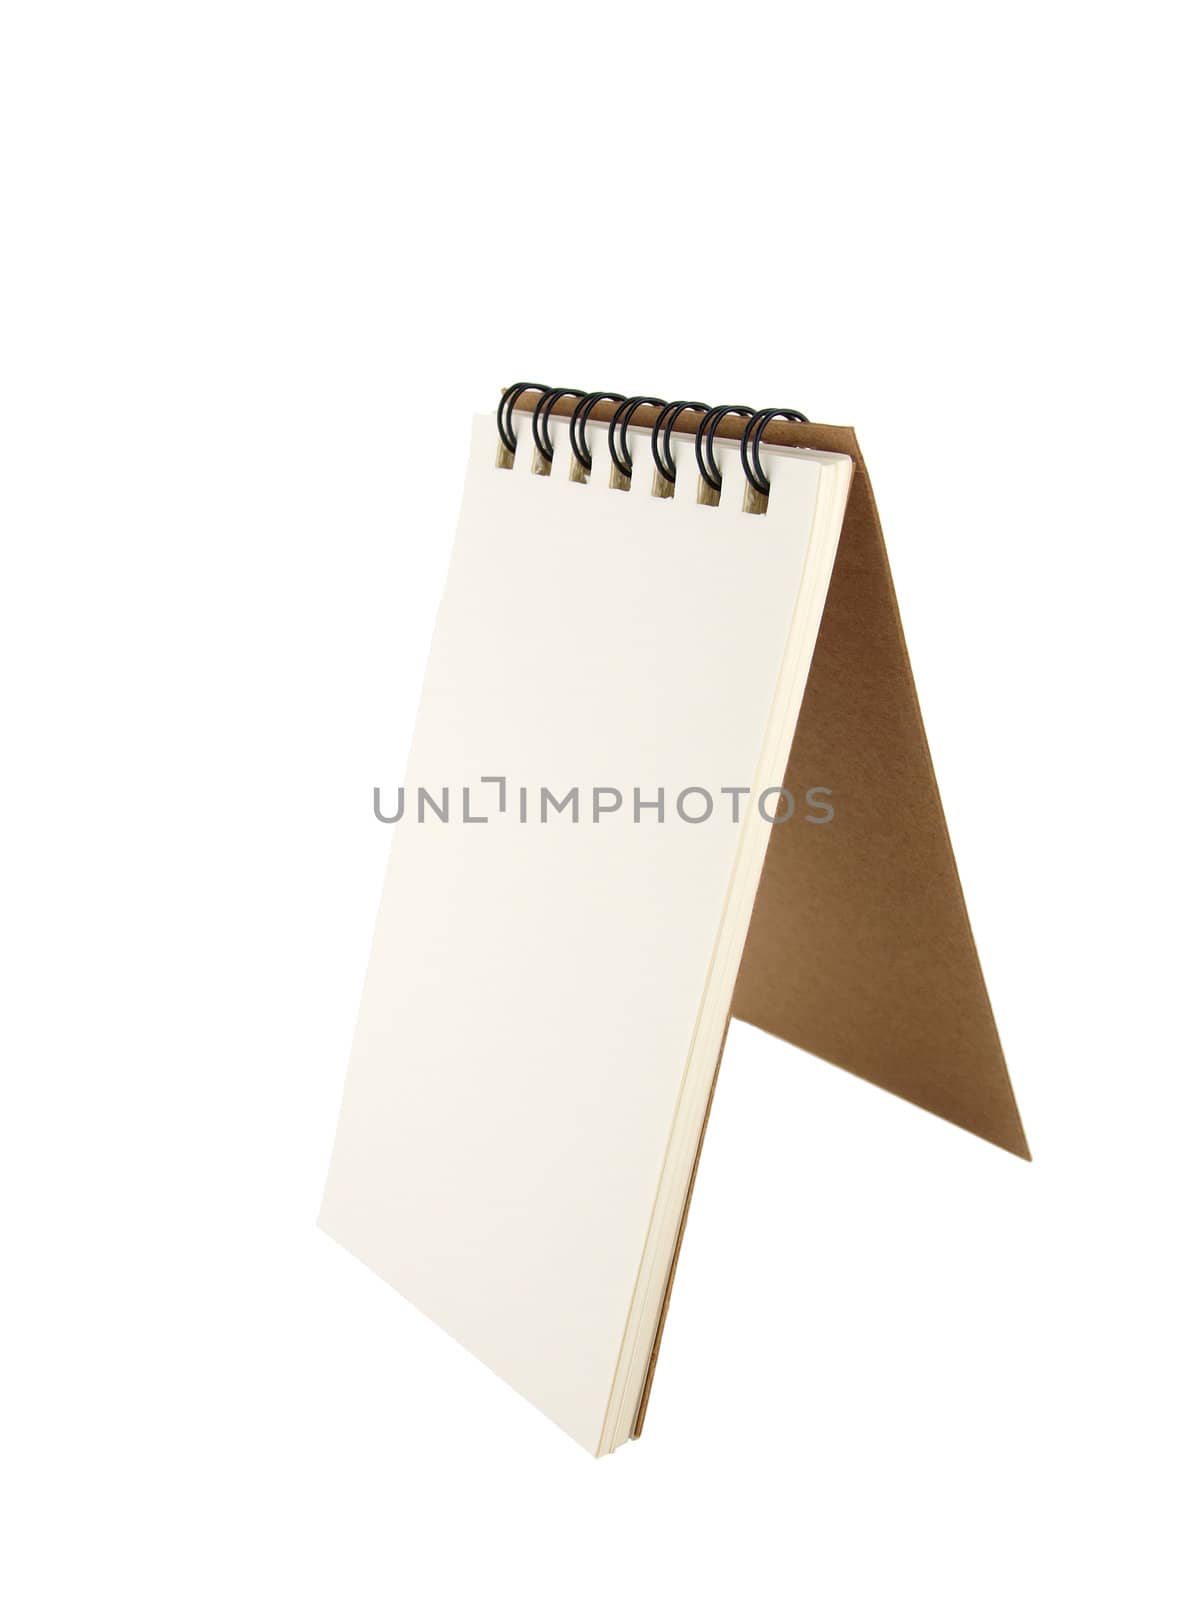 Isolated pencil with notebook on white background by jakgree